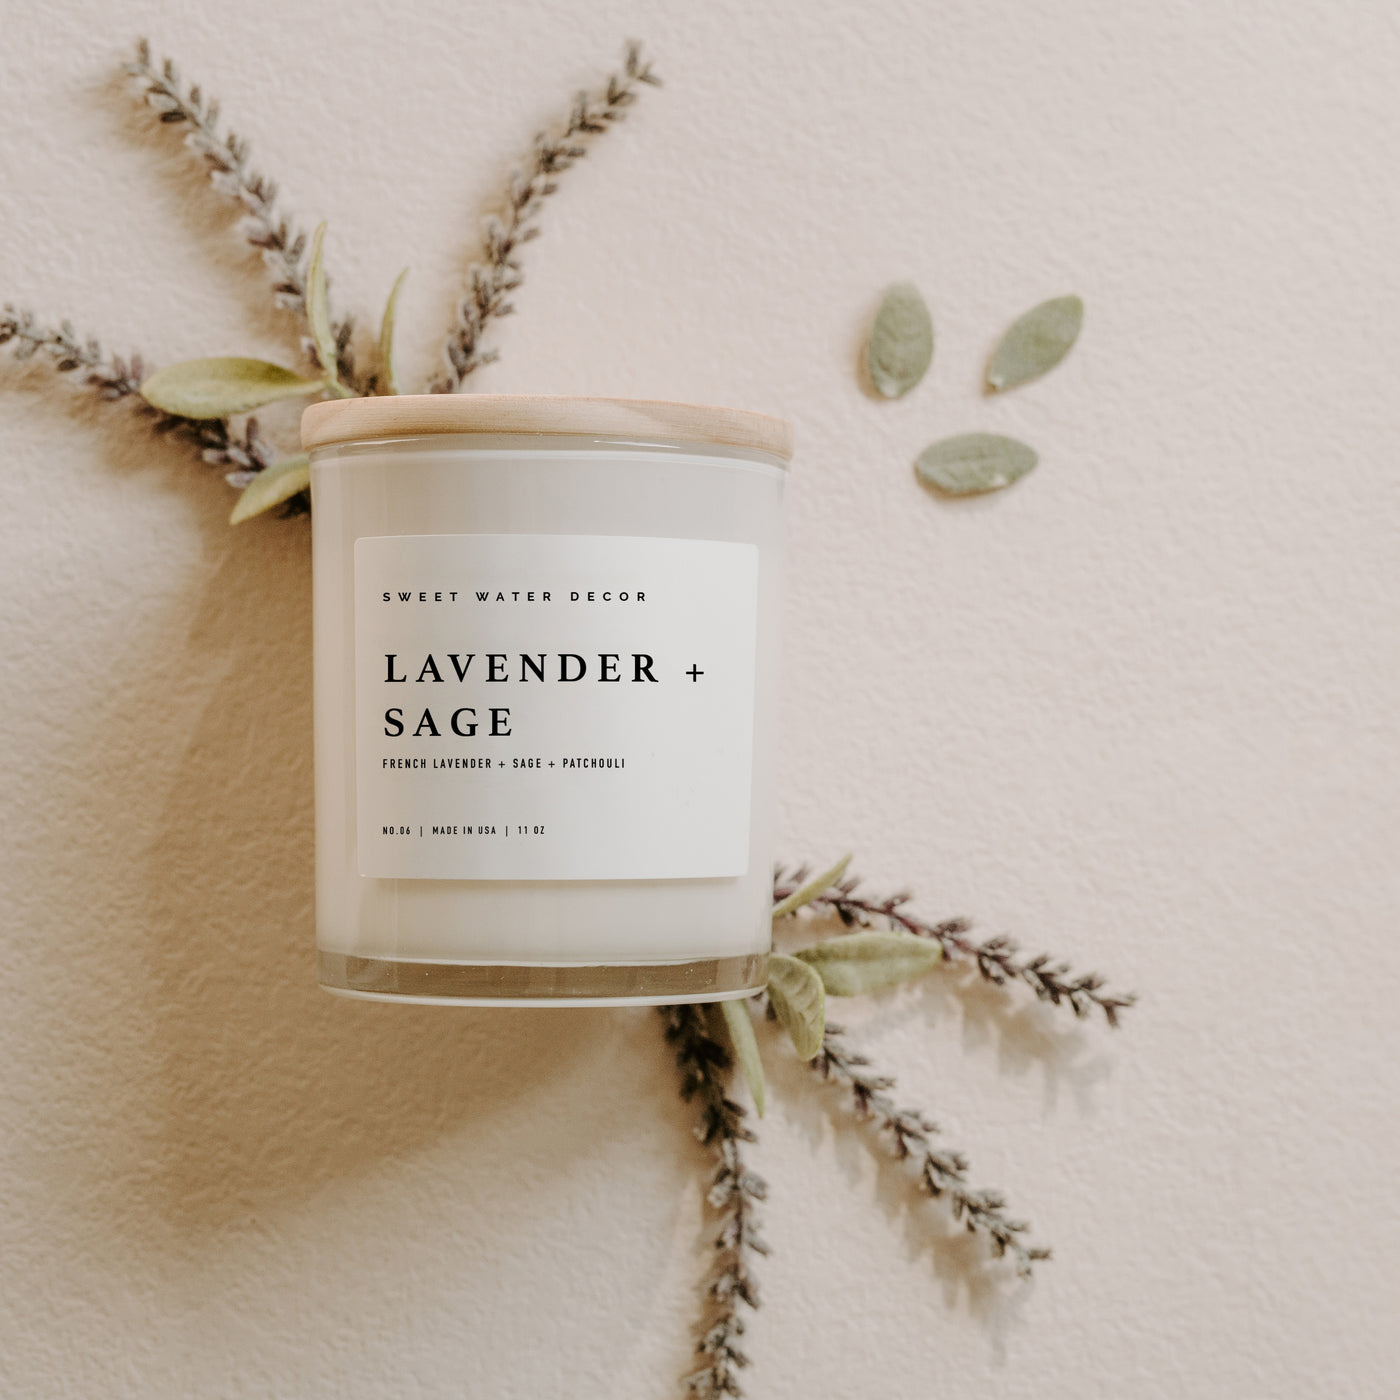 Lavender and Sage Soy Candle - White Jar - 11 oz